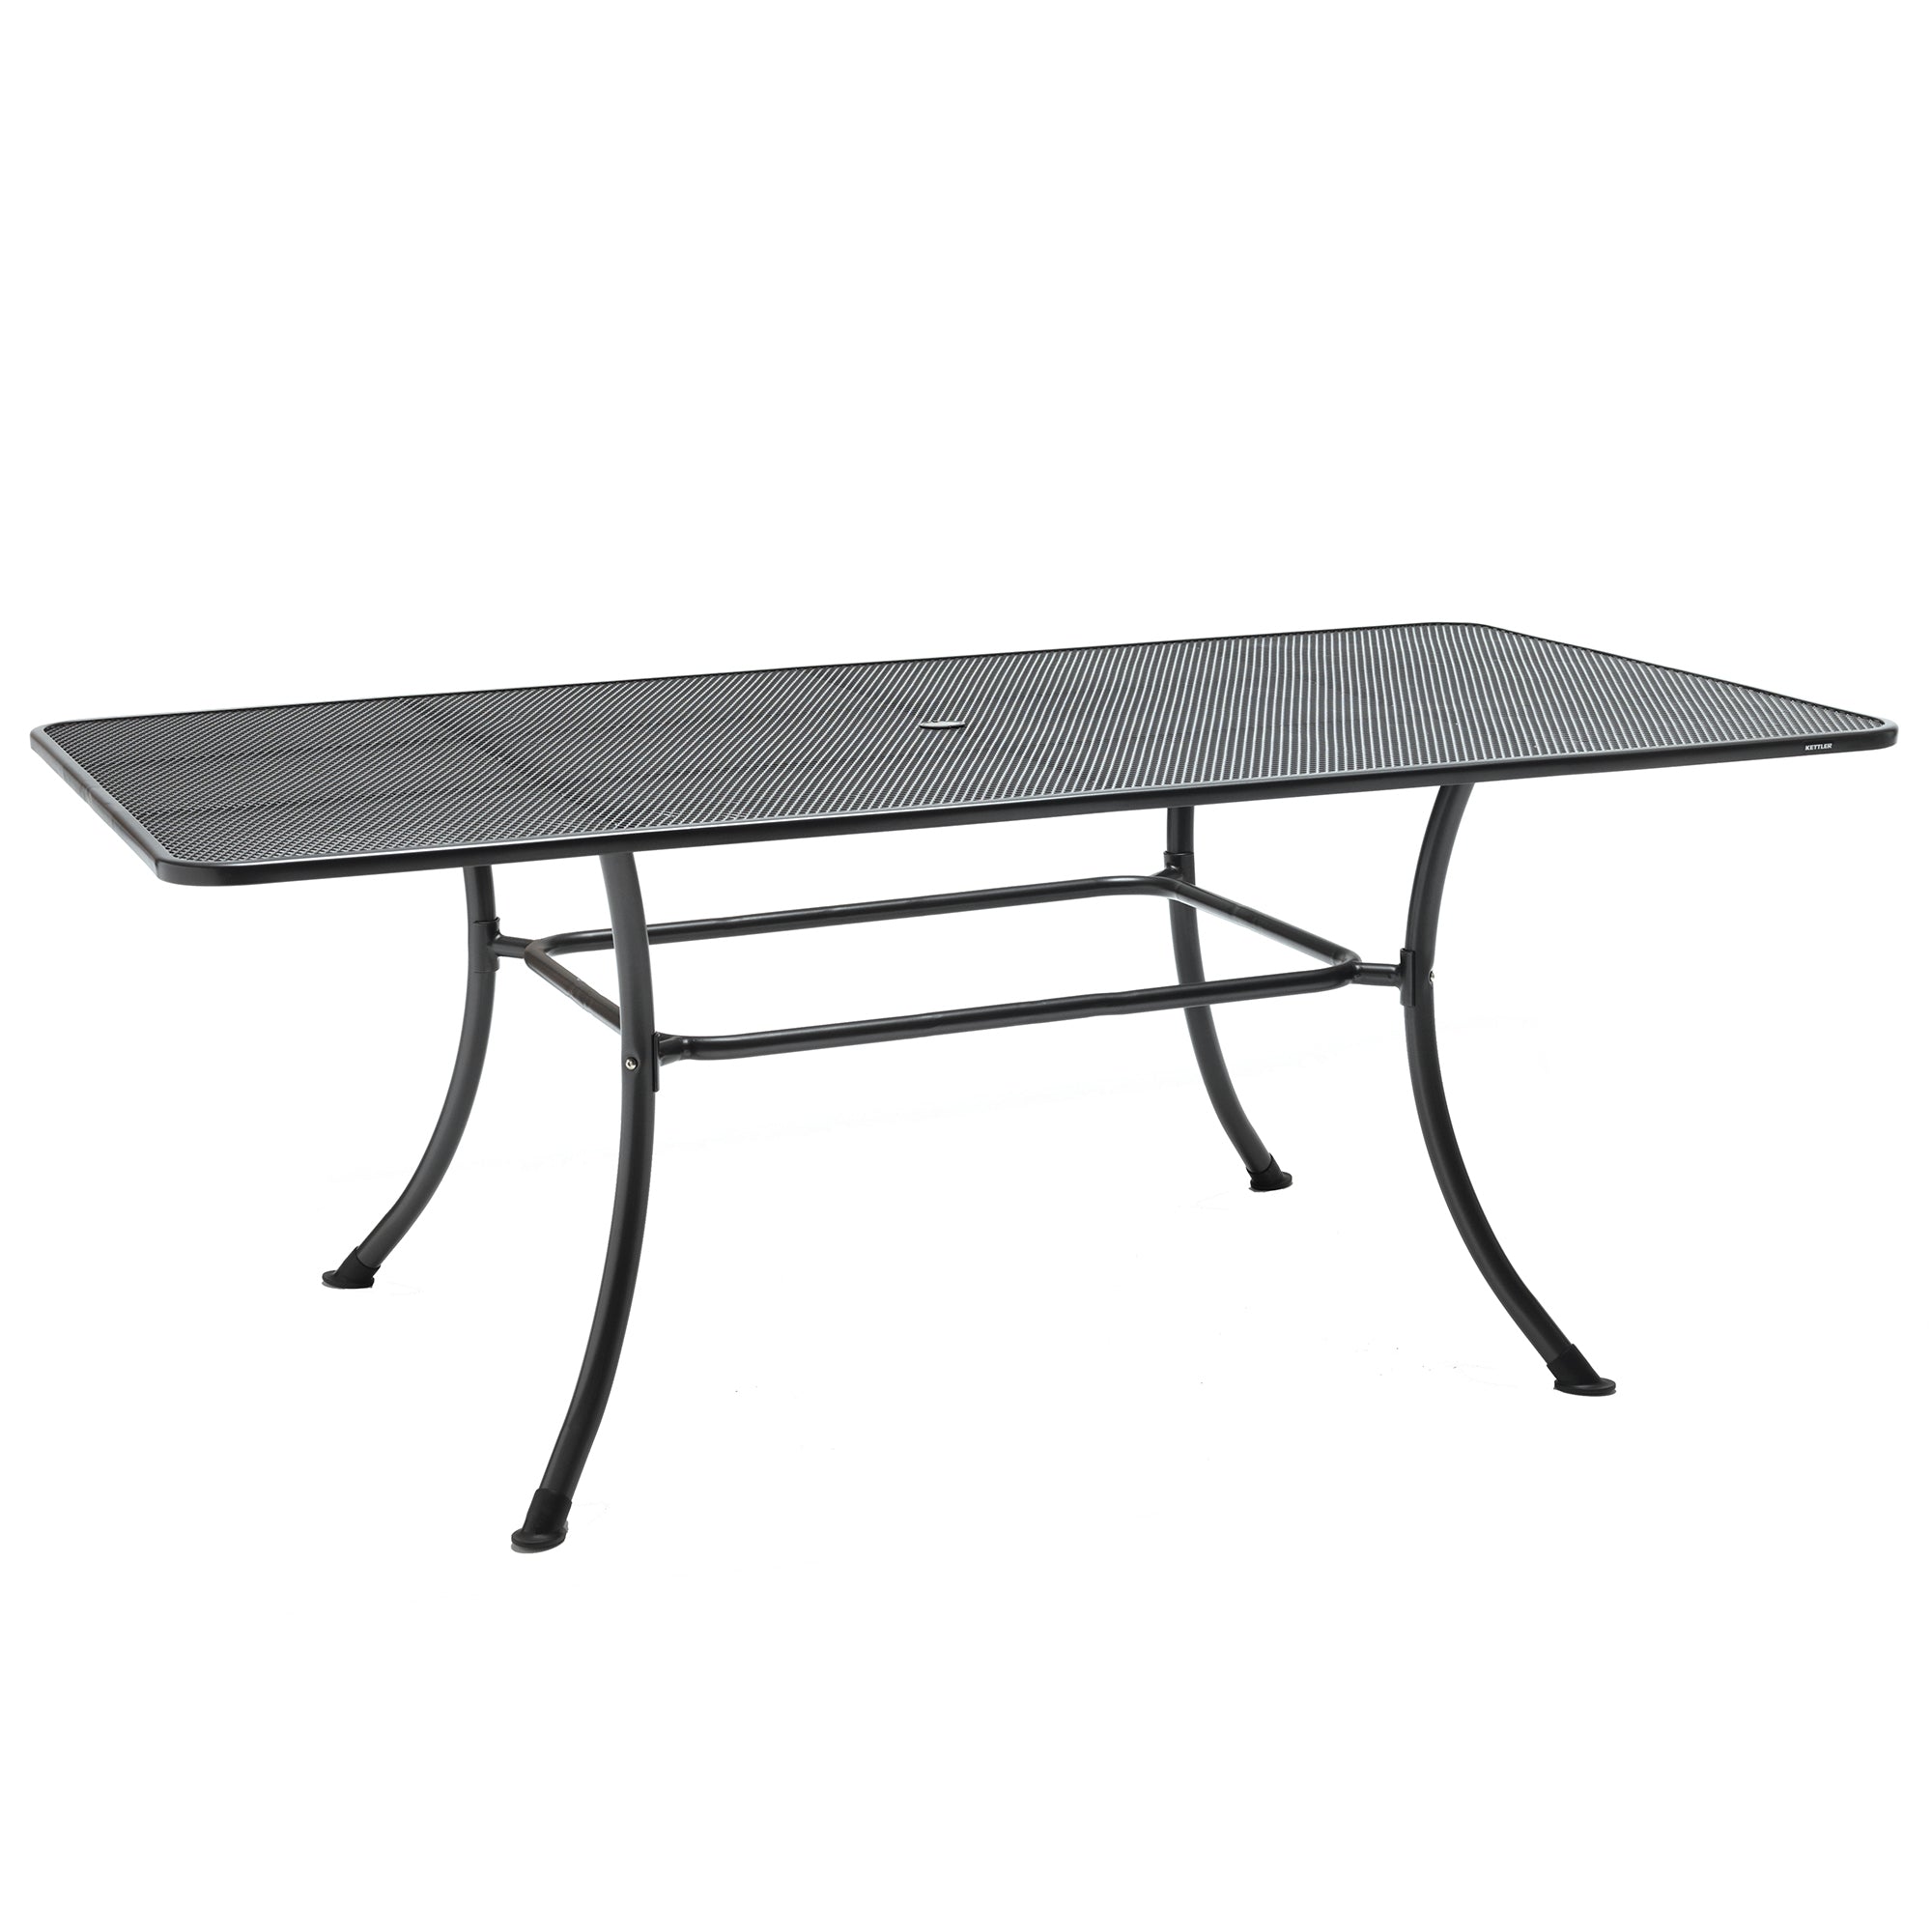 79" x 40" Wrought Iron Mesh Top Table